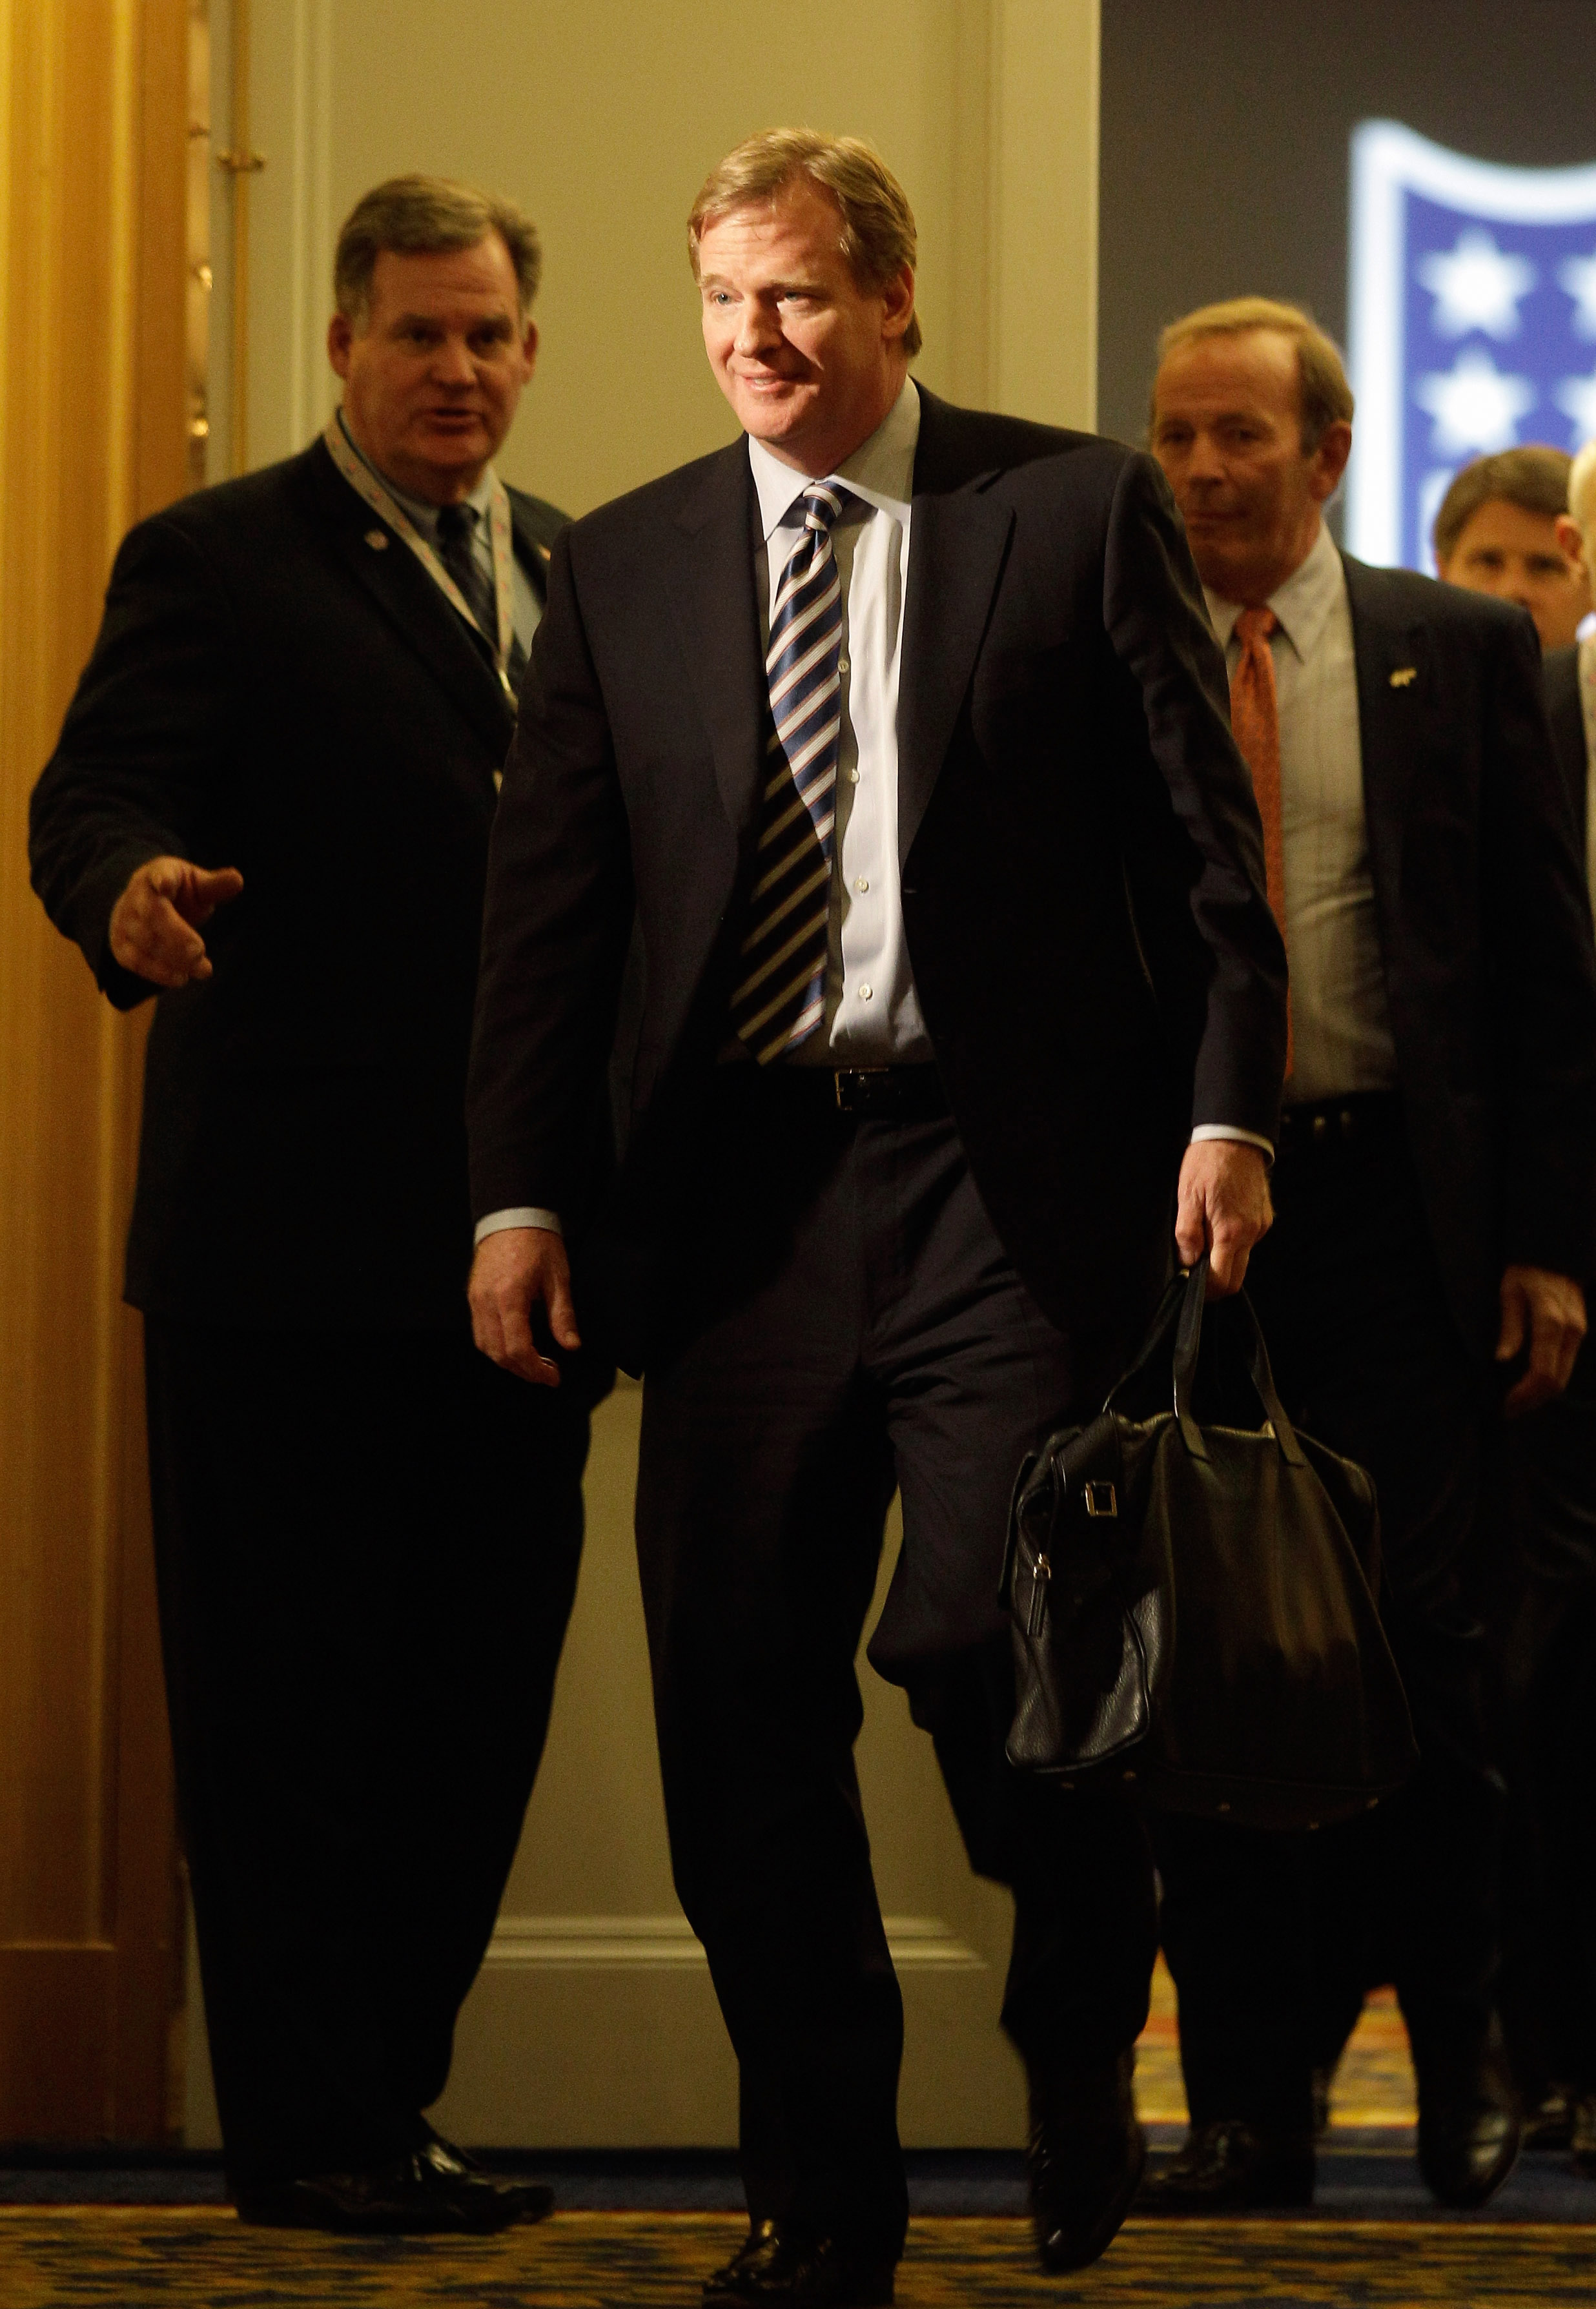 CHANTILLY, VA - MARCH 02:  NFL Commissioner Roger Goodell (C) leaves a meeting with NFL owners at a hotel on March 2, 2011 in Chantilly, Virginia. The NFL owners are meeting in Chantilly to discuss negotiations with the players union about a collective ba